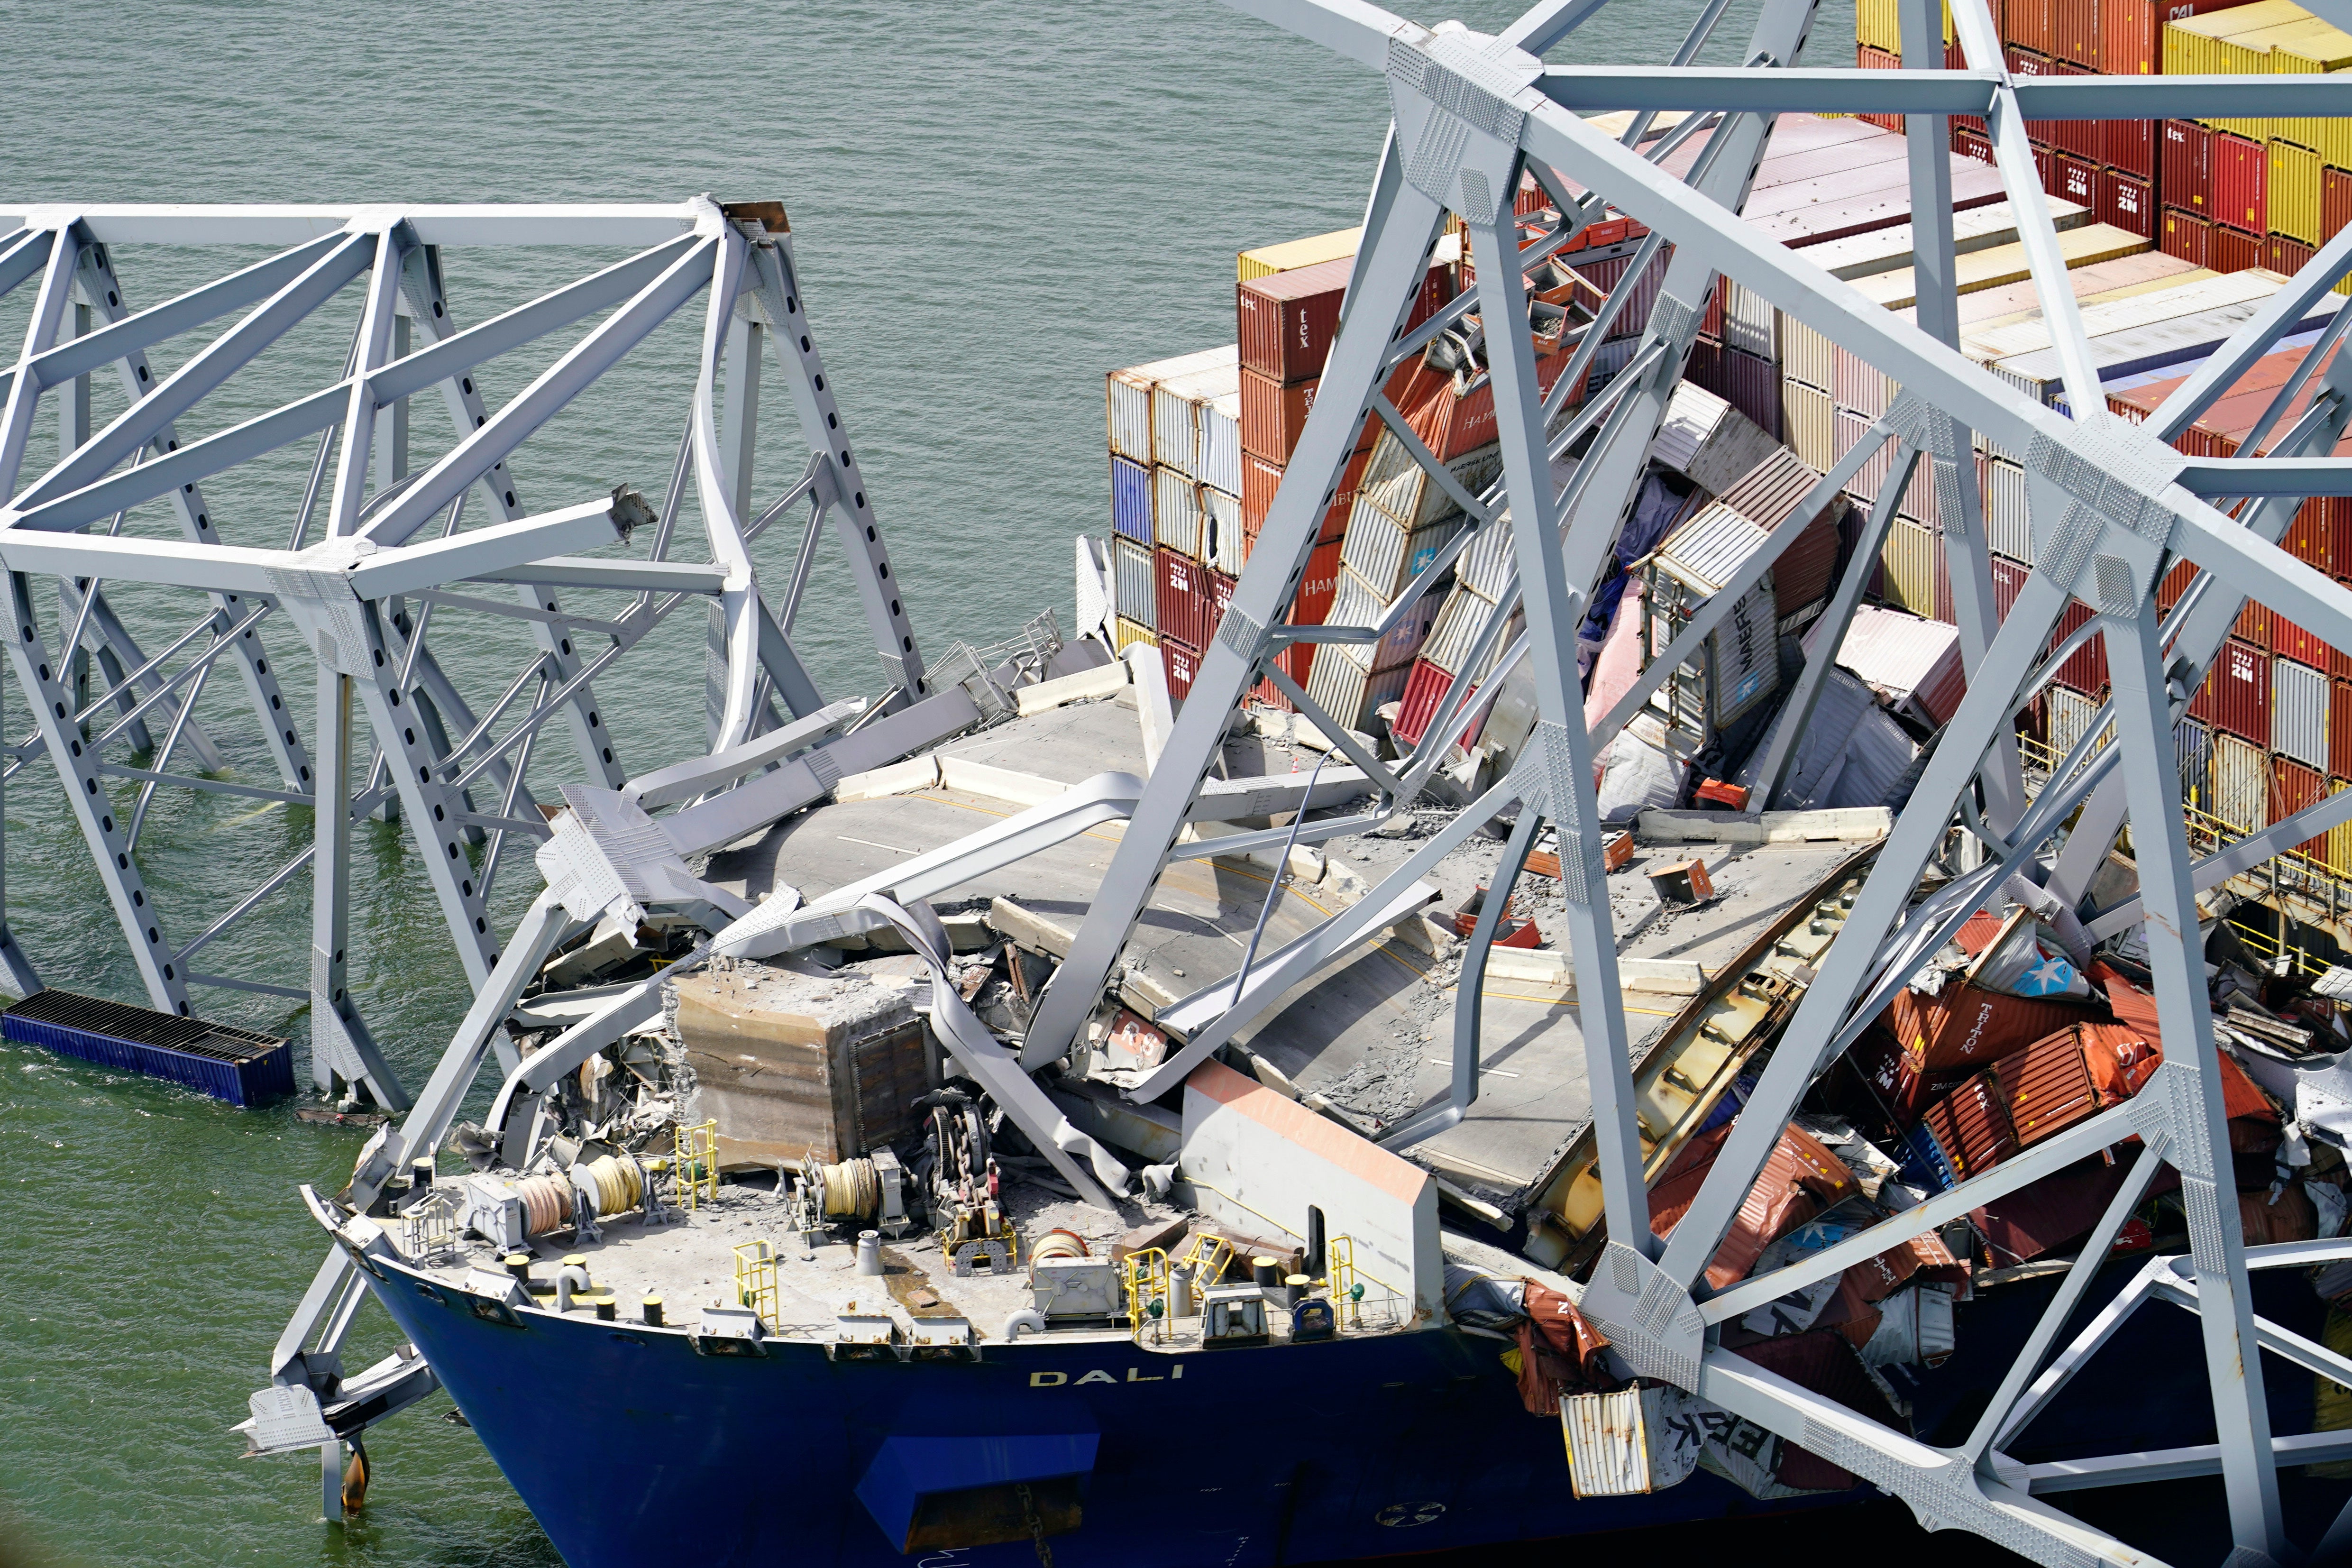 In this aerial image released by the Maryland National Guard, the cargo ship Dali is stuck under part of the structure